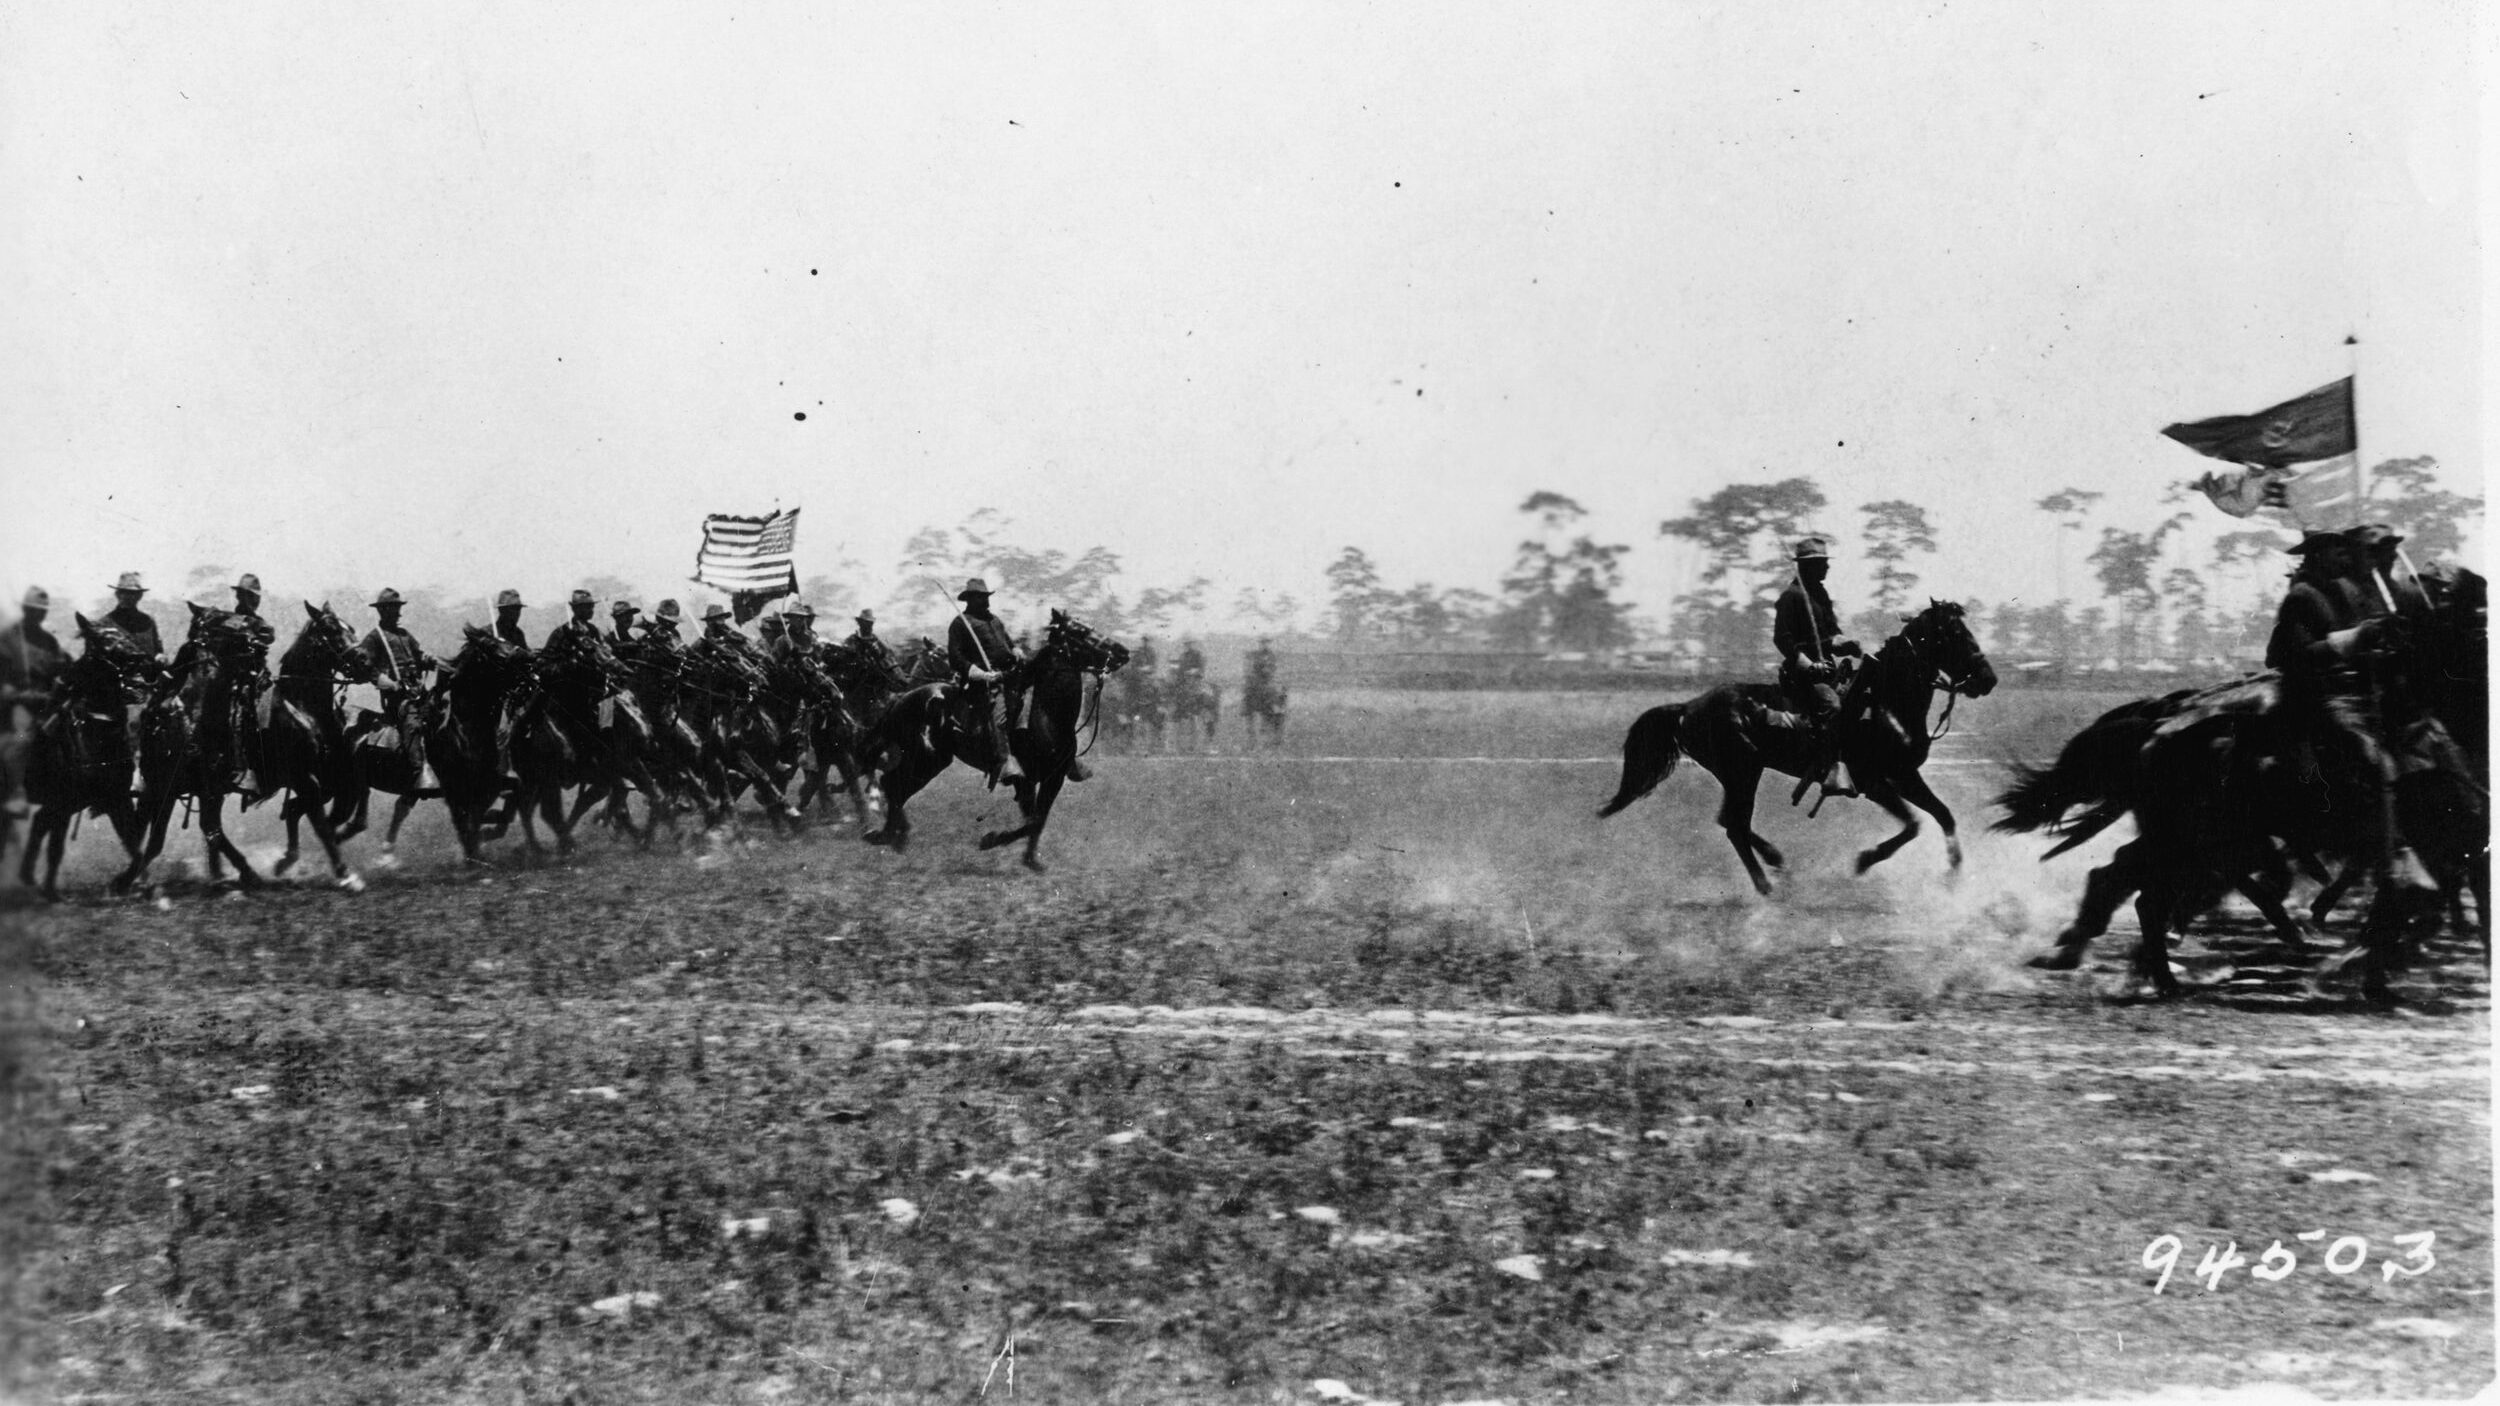 The 1st U.S. Volunteer Cavalry, better known as the Rough Riders, was part of “Fighting Joe” Wheeler’s mounted division in Cuba.